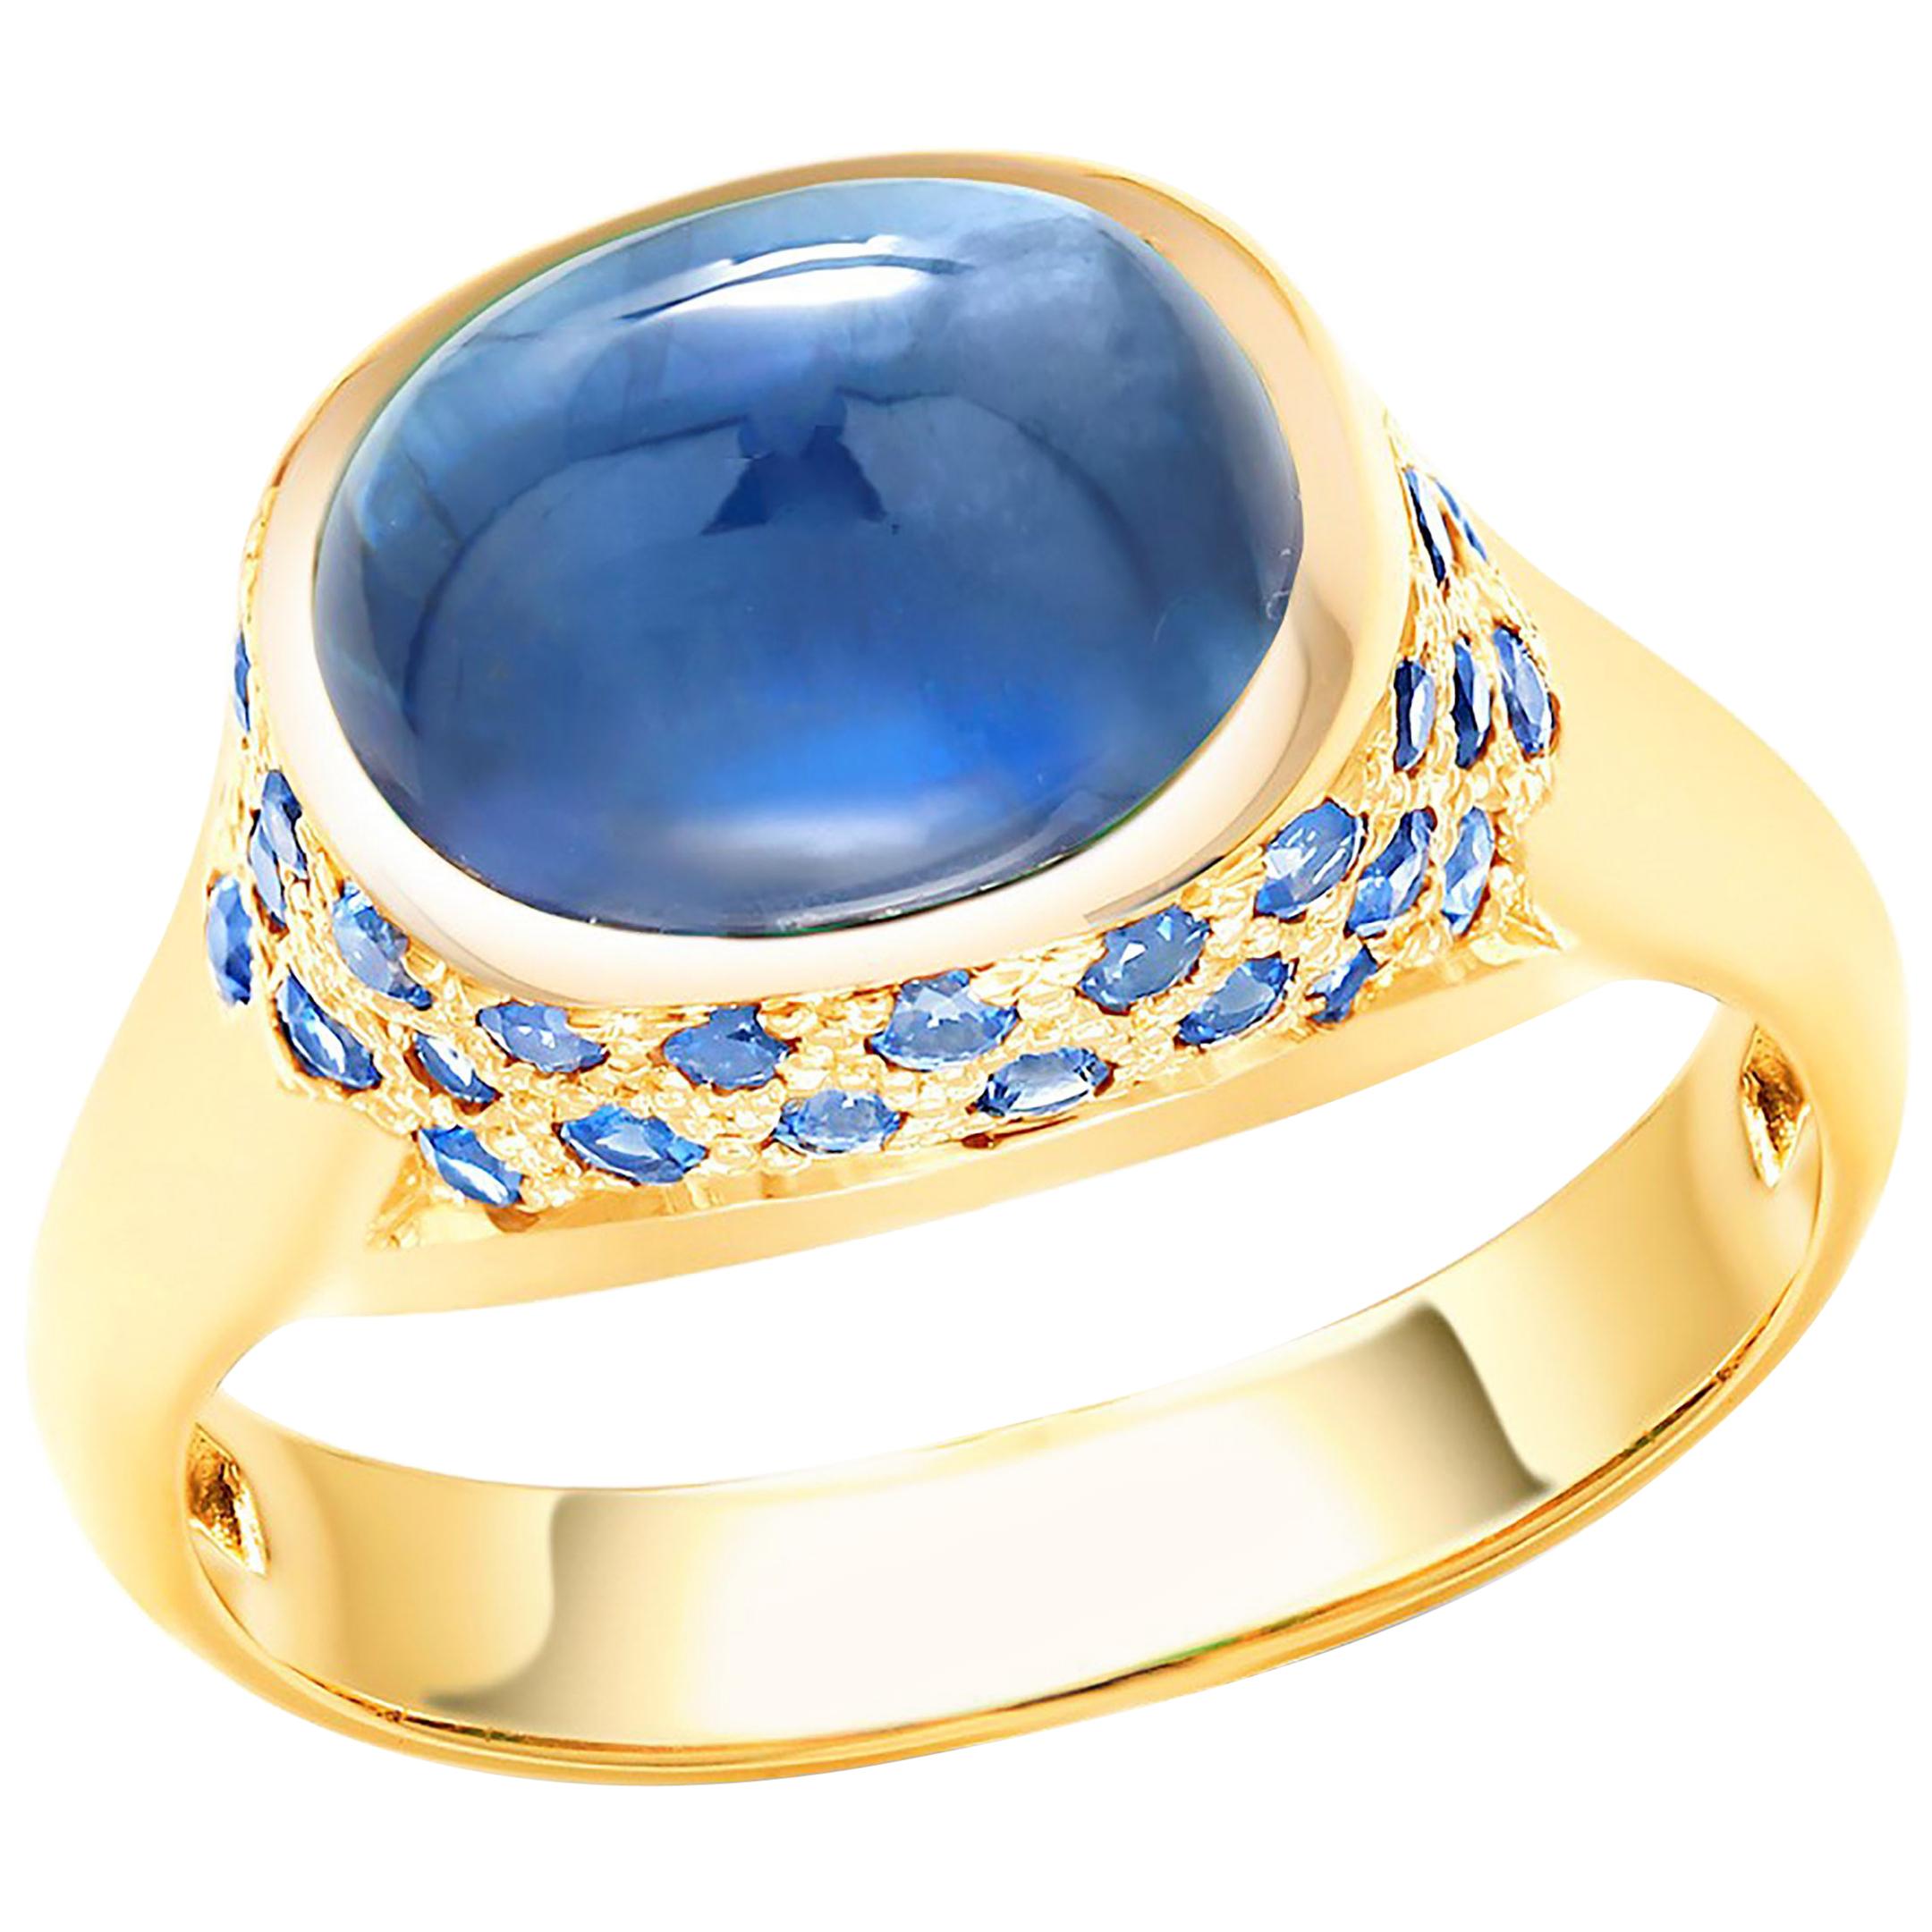 Contemporary Ceylon Cabochon Sapphire Dome Yellow Gold Cocktail Ring Weighing 3.09 Carat 